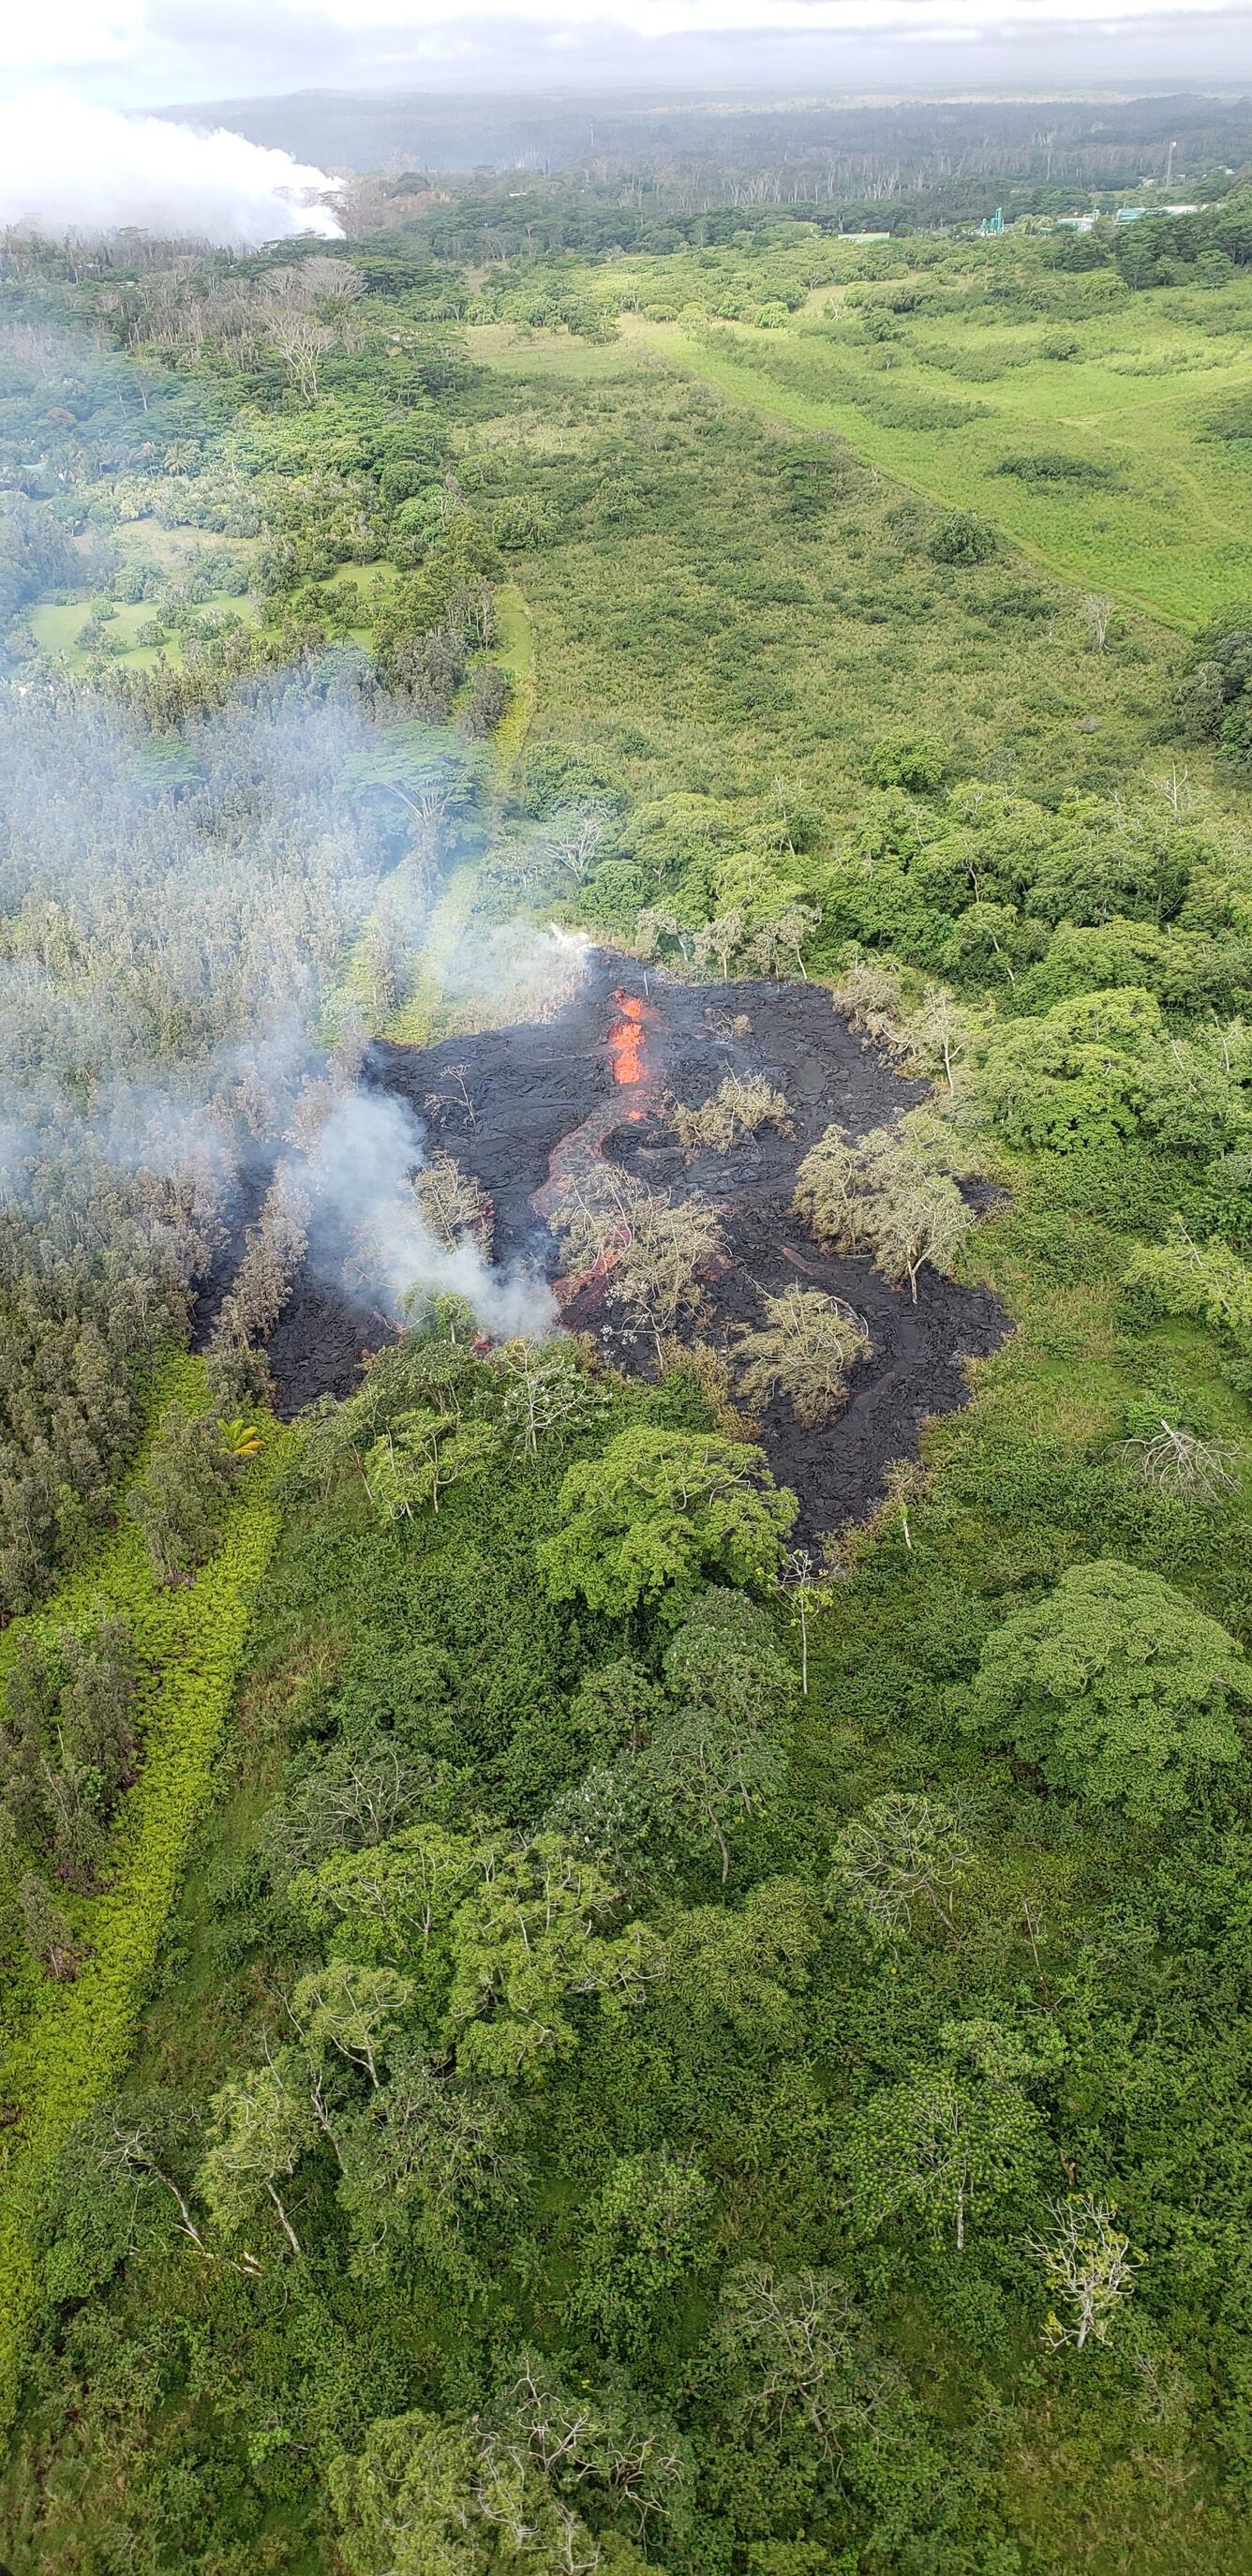 At 08:27 a.m. HST, Aerial view from the Hawaii County Fire Departm...